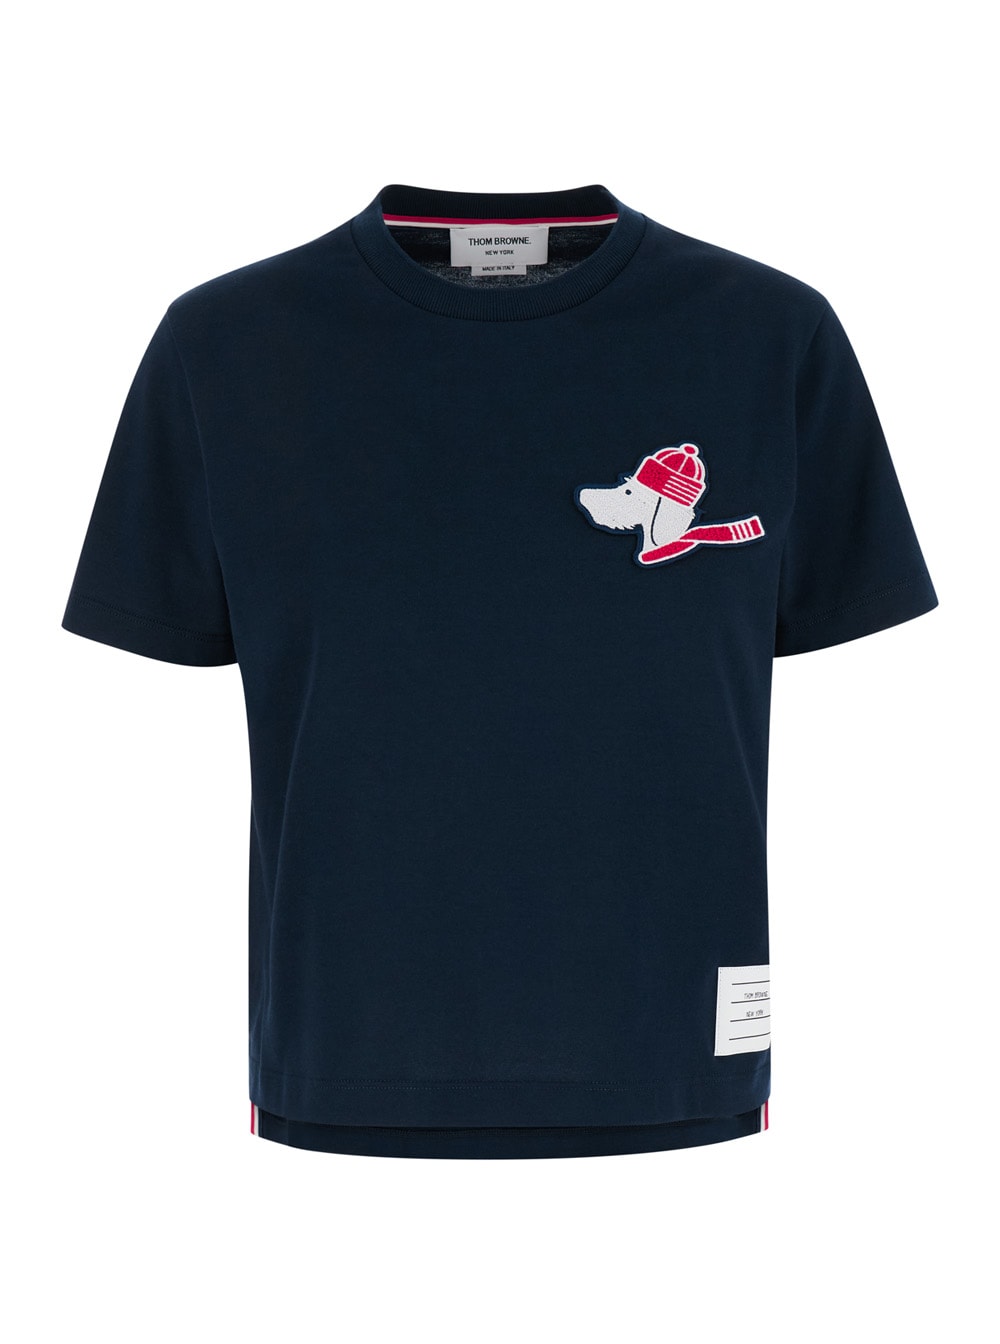 Short Sleeve Tee W/ Hector W/ A Hat Chenille Embroidery In Med Weight Jersey